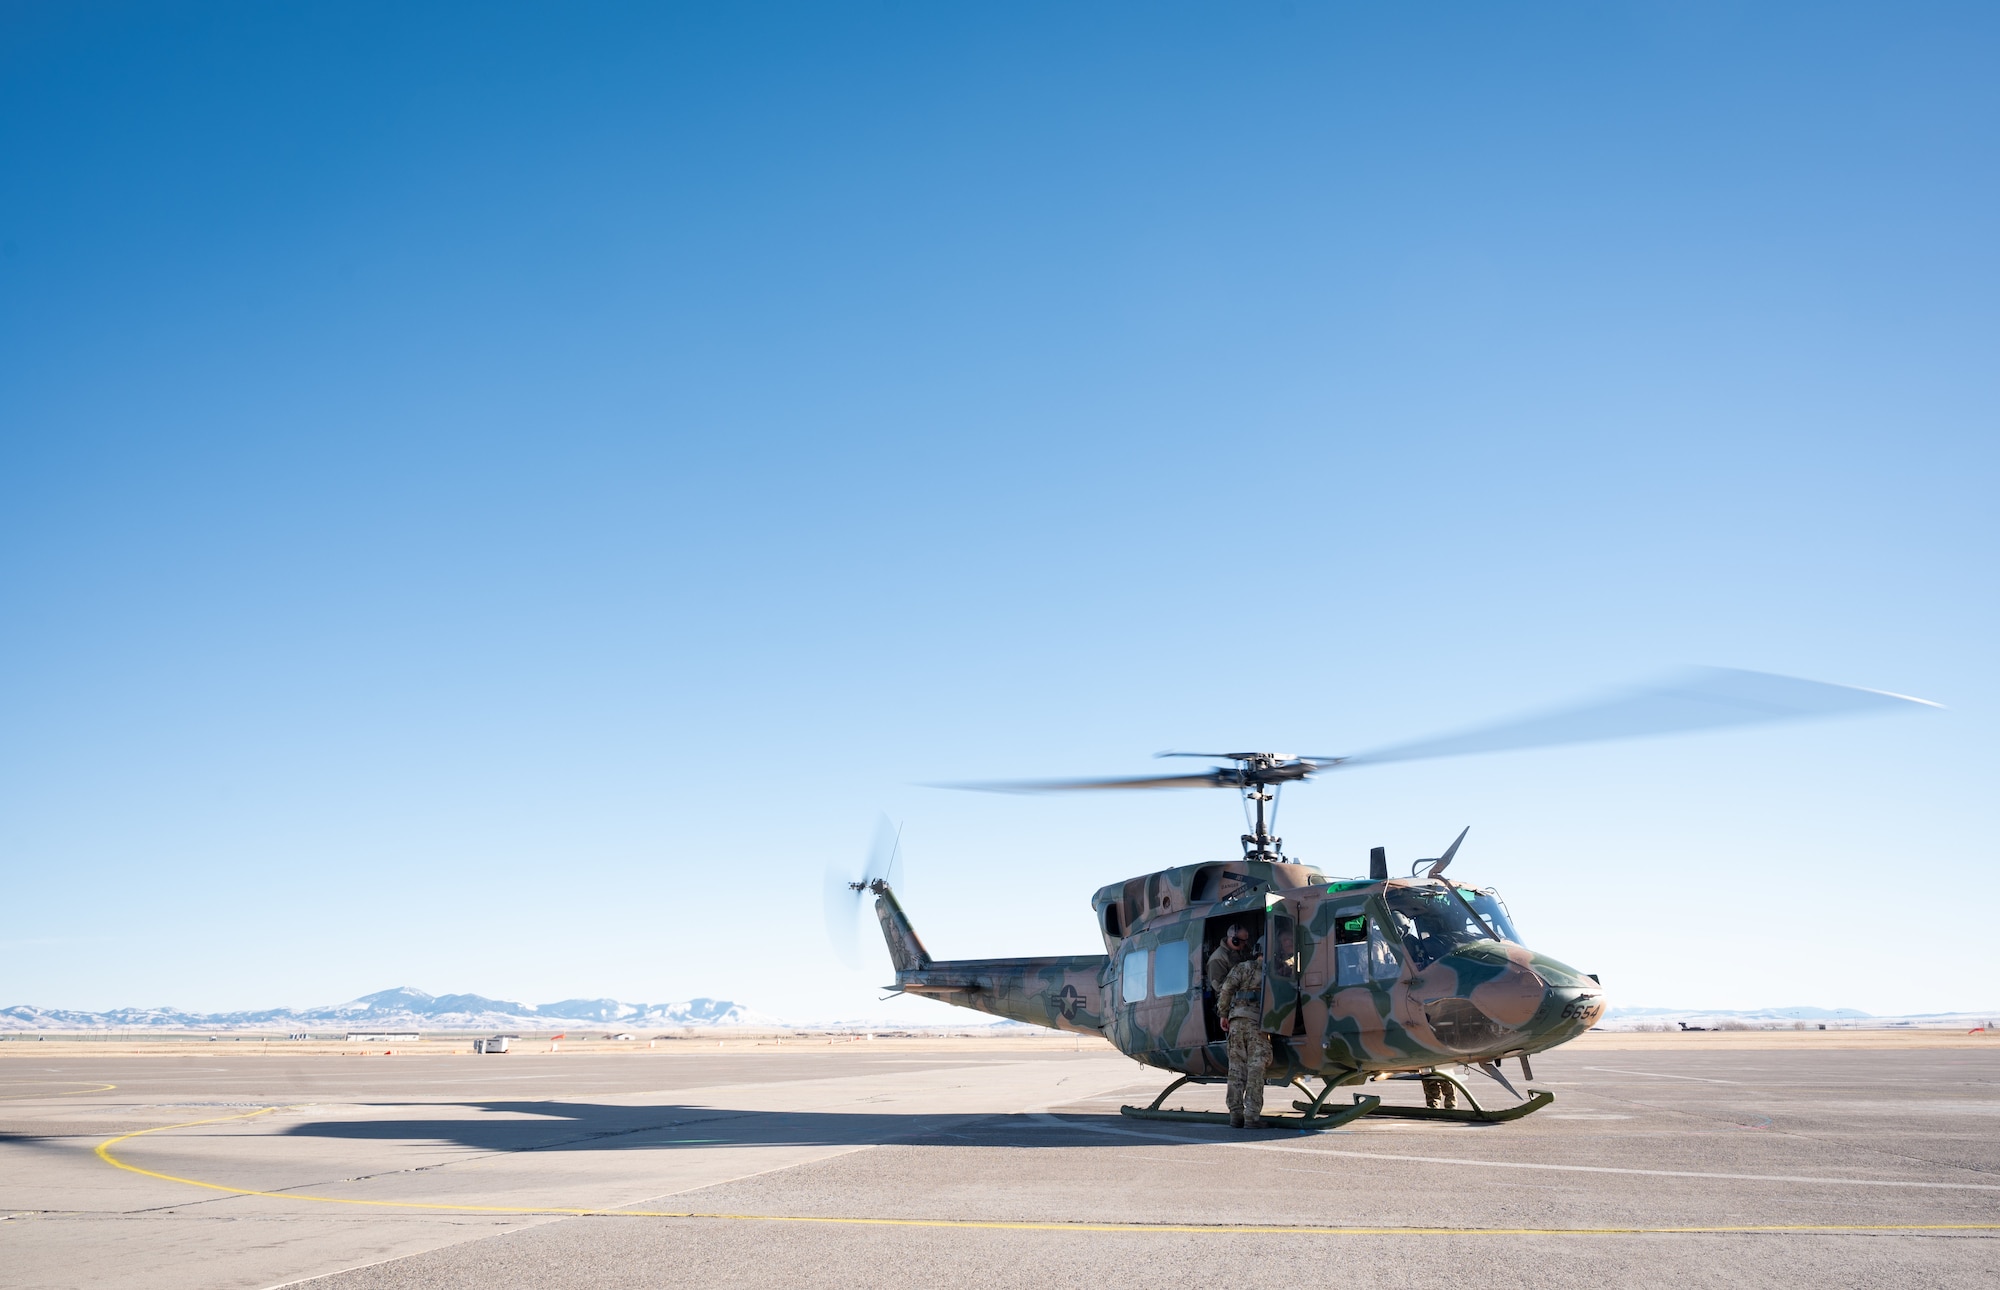 A helicopter sits on a flightline with mountain range faintly visible in the background.